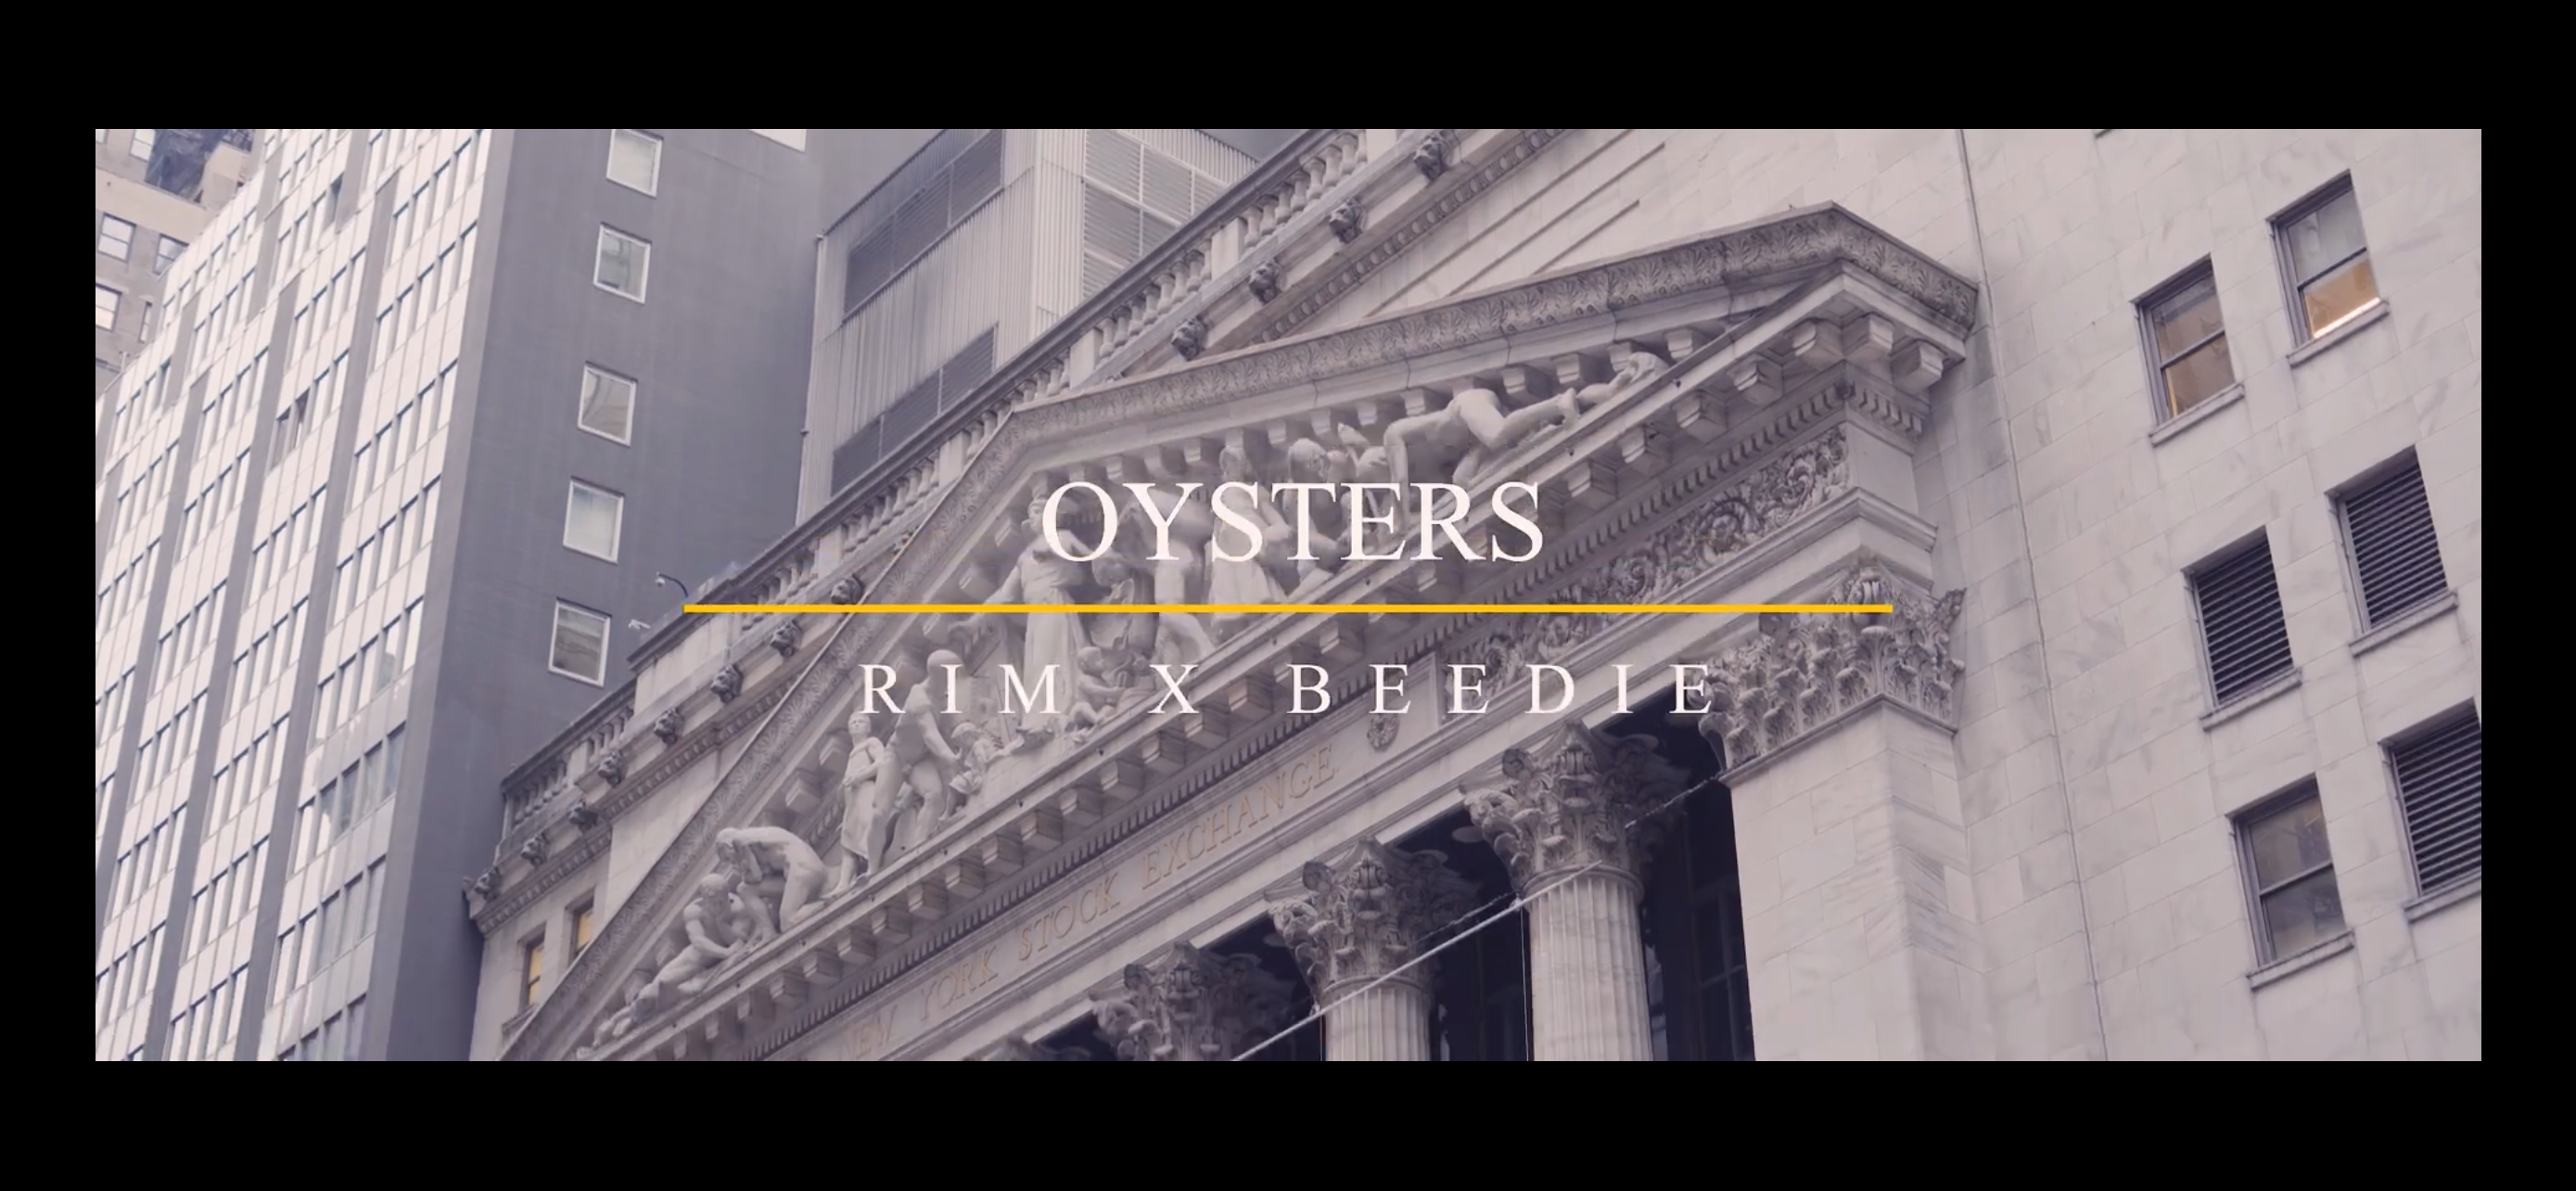 Beedie & Rim "Oysters" (Official Music Video)